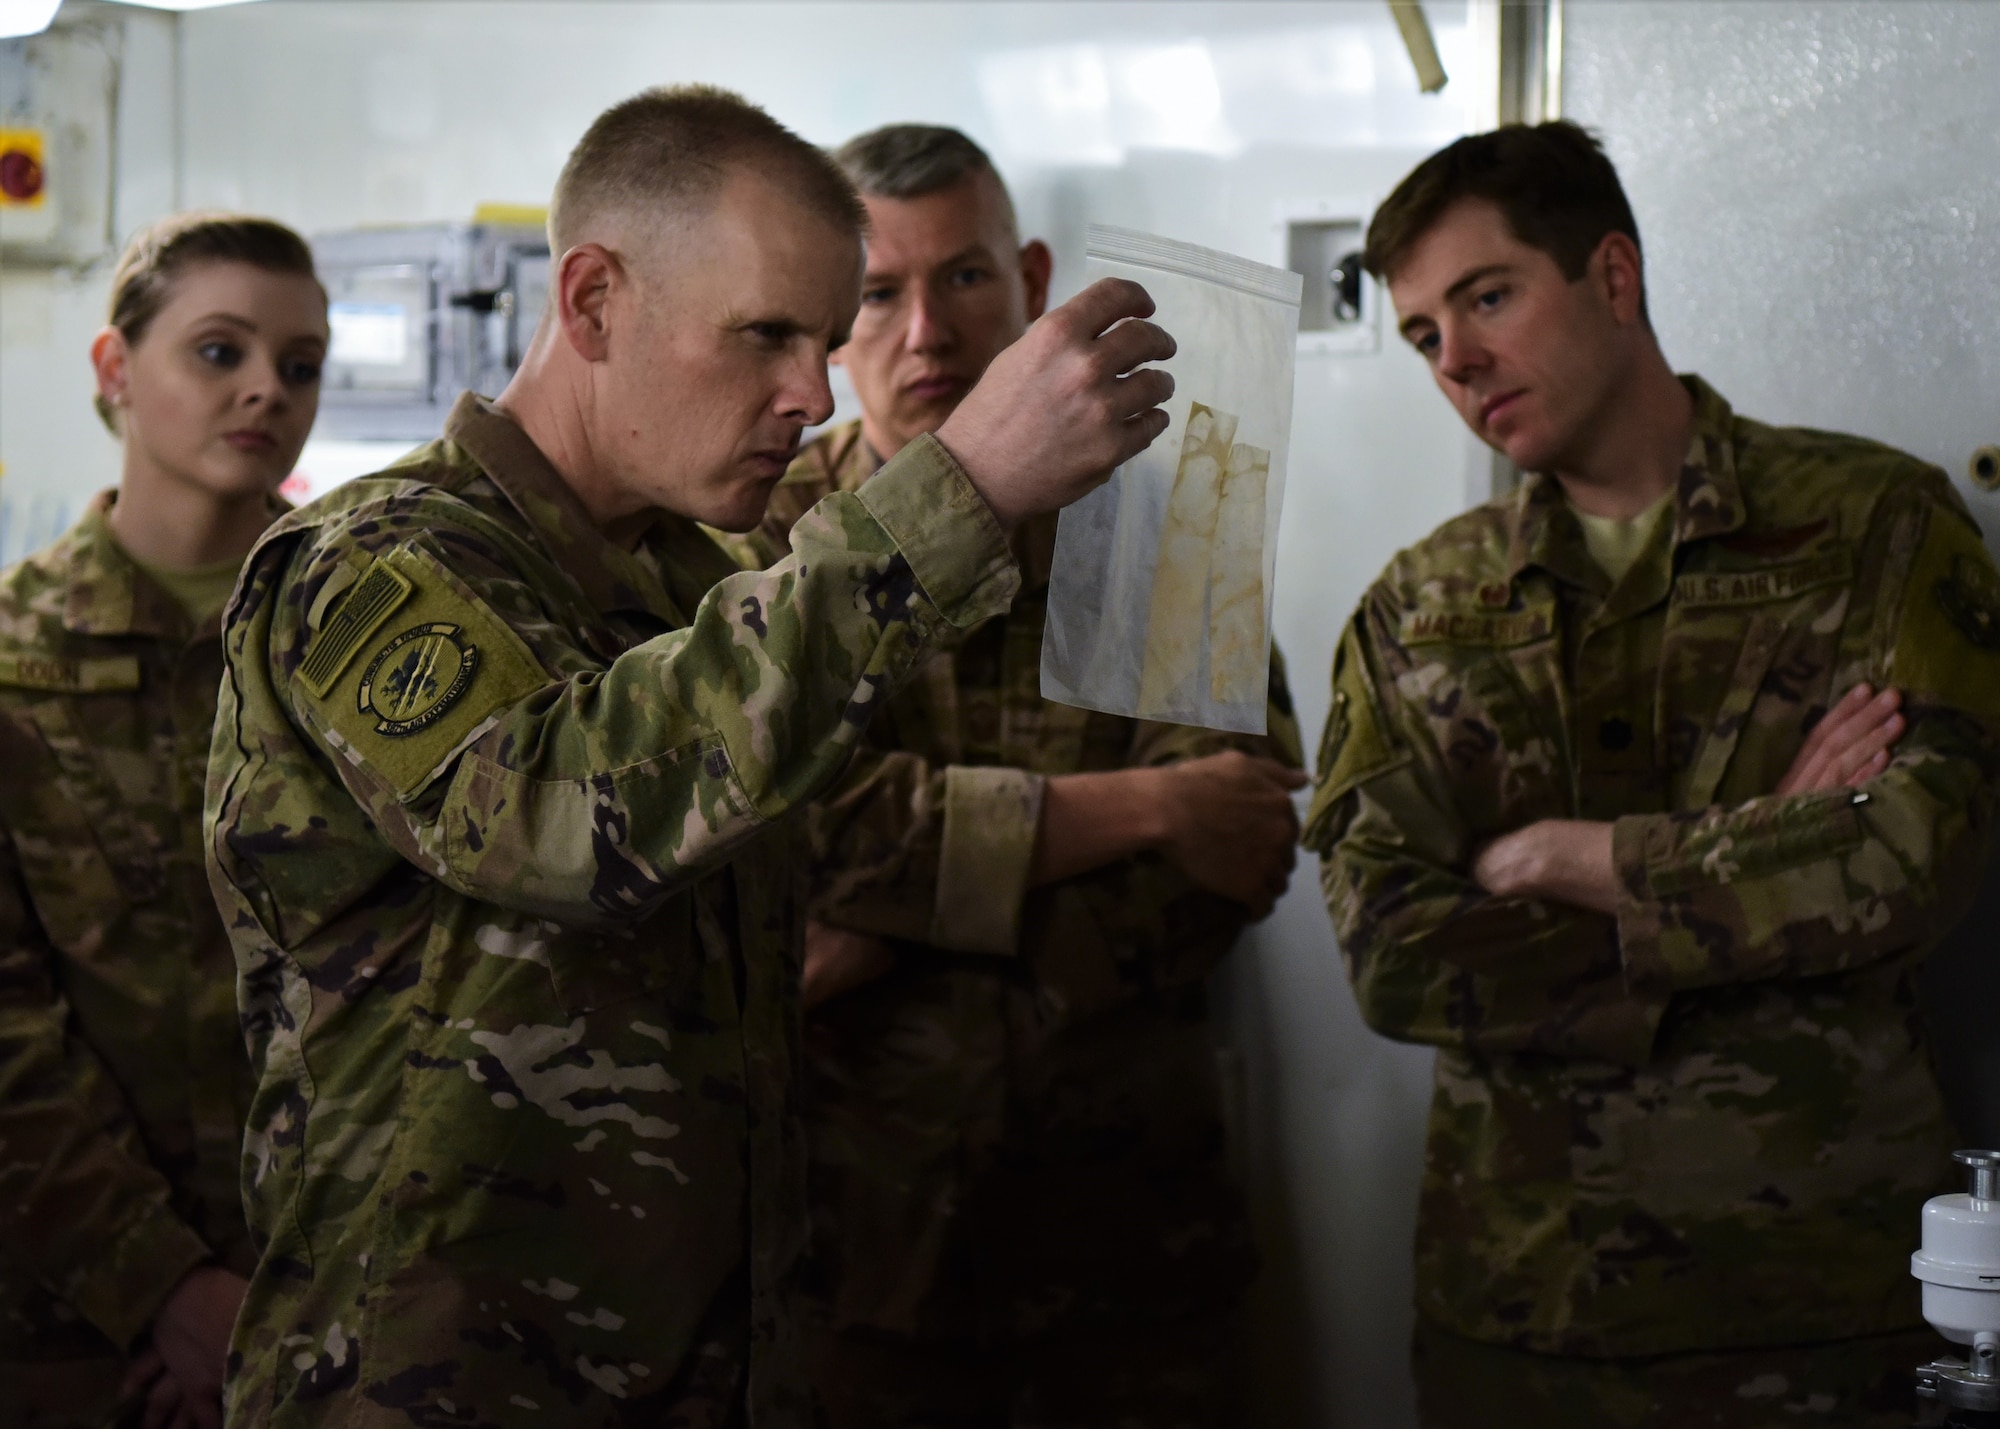 Senior Airman Paige Dixon, Chief Master Sgt. Christopher Walker, Senior Master Sgt. Brian Rohlman and Lt. Col. Mason MacGarvey, all part of the 387th Air Expeditionary Squadron, inspect blast residue during a visit to the Camp Arifjan level-II forensics lab, June 27, 2018. The 387th AES provides administrative support to more than 410 Joint Expeditionary Task and Individual Augmentee Airmen, who encompass more than 100 Air Force specialty codes and are currently forward deployed to 11 countries. (U.S. Air Force photo by Staff Sgt. Christopher Stoltz)